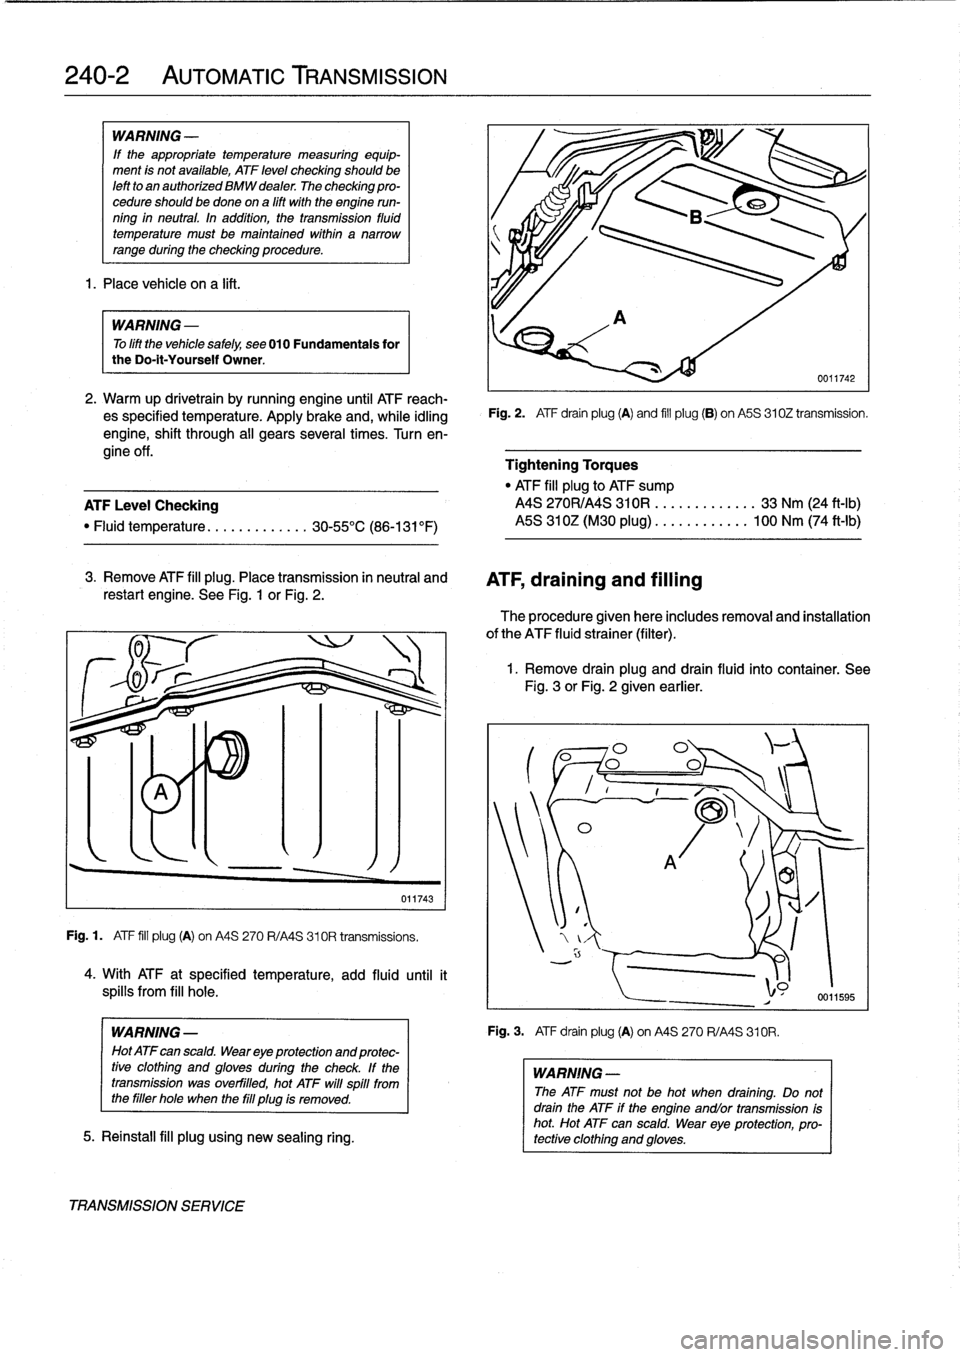 BMW 328i 1994 E36 Owners Manual 
240-2

	

AUTOMATIC
TRANSMISSION

WARNING
-

If
the
appropriate
temperature
measuring
equip-
ment
is
not
available,
ATF
leve¡
checking
shouldbe
left
to
an
authorized
BMW
dealer
The
checking
pro-
ced